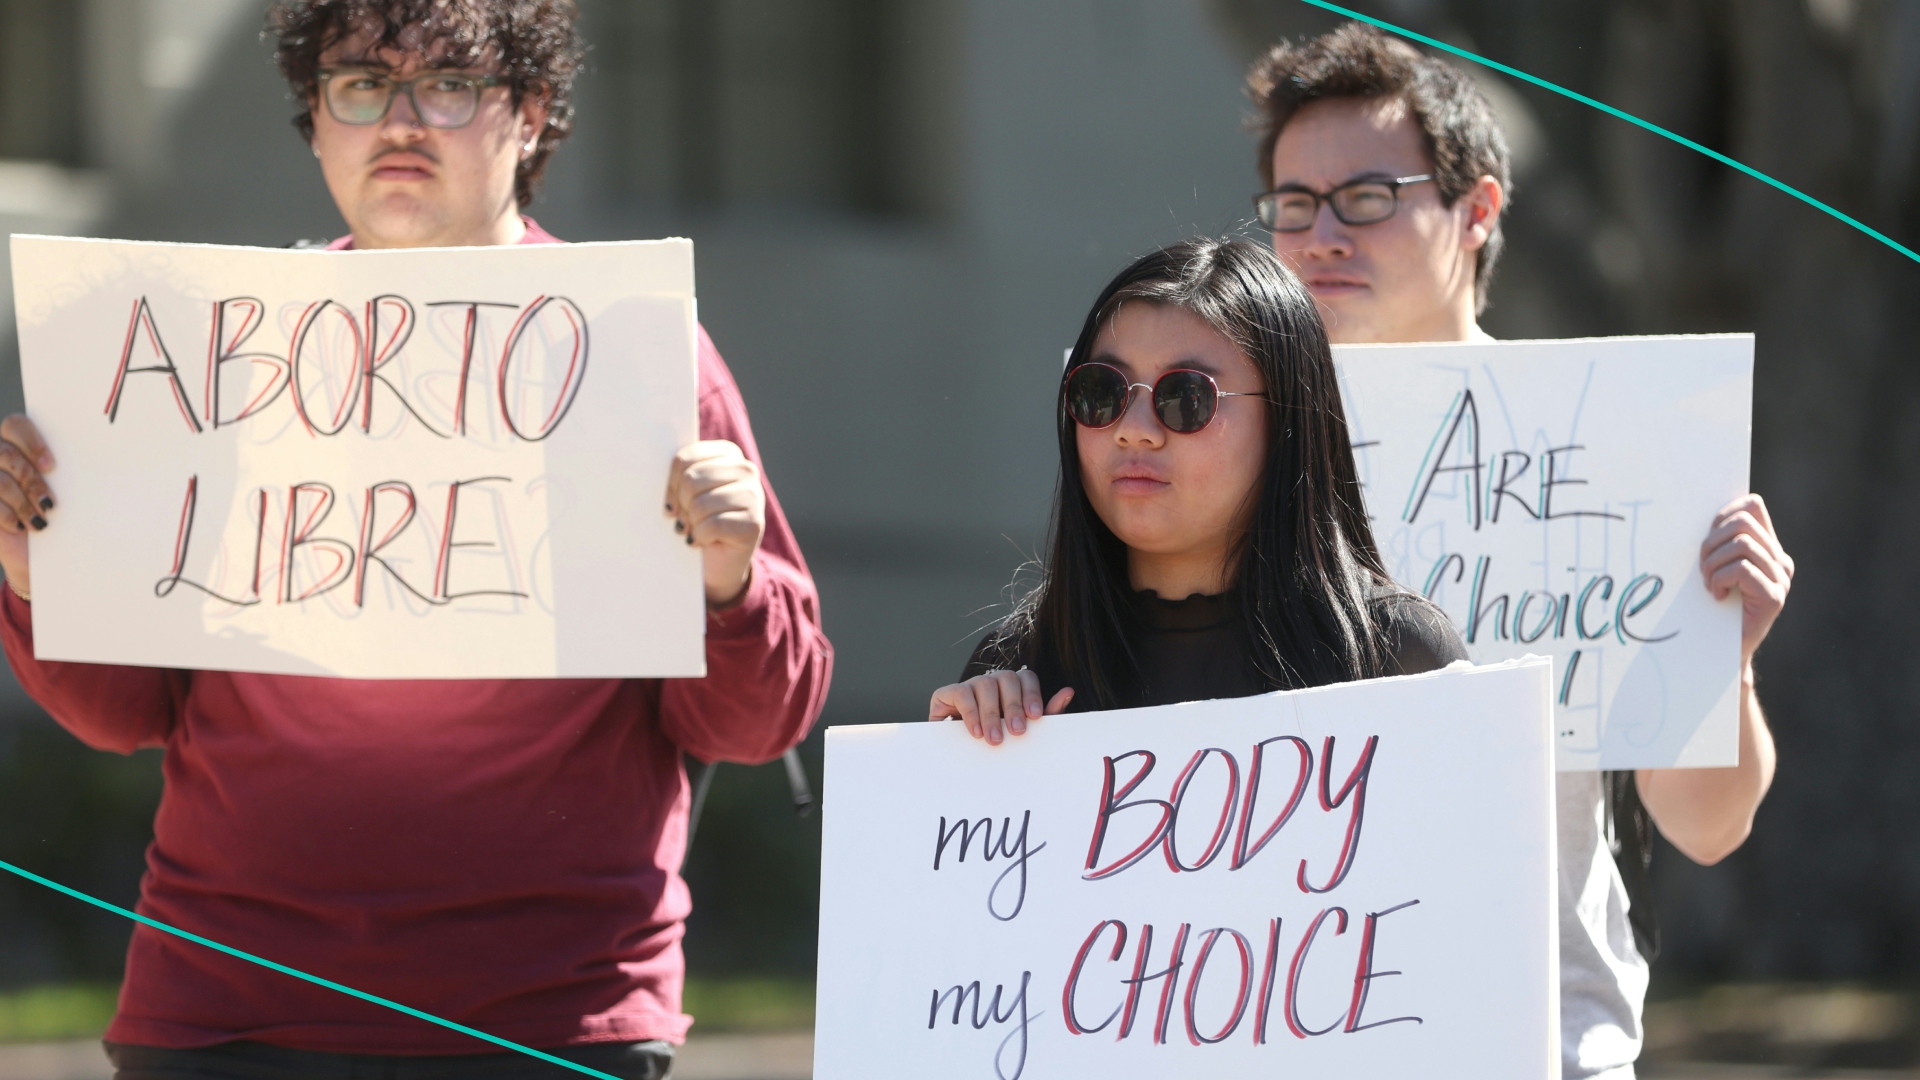 Demonstrators hold signs as they stage a protest in favor of abortion rights